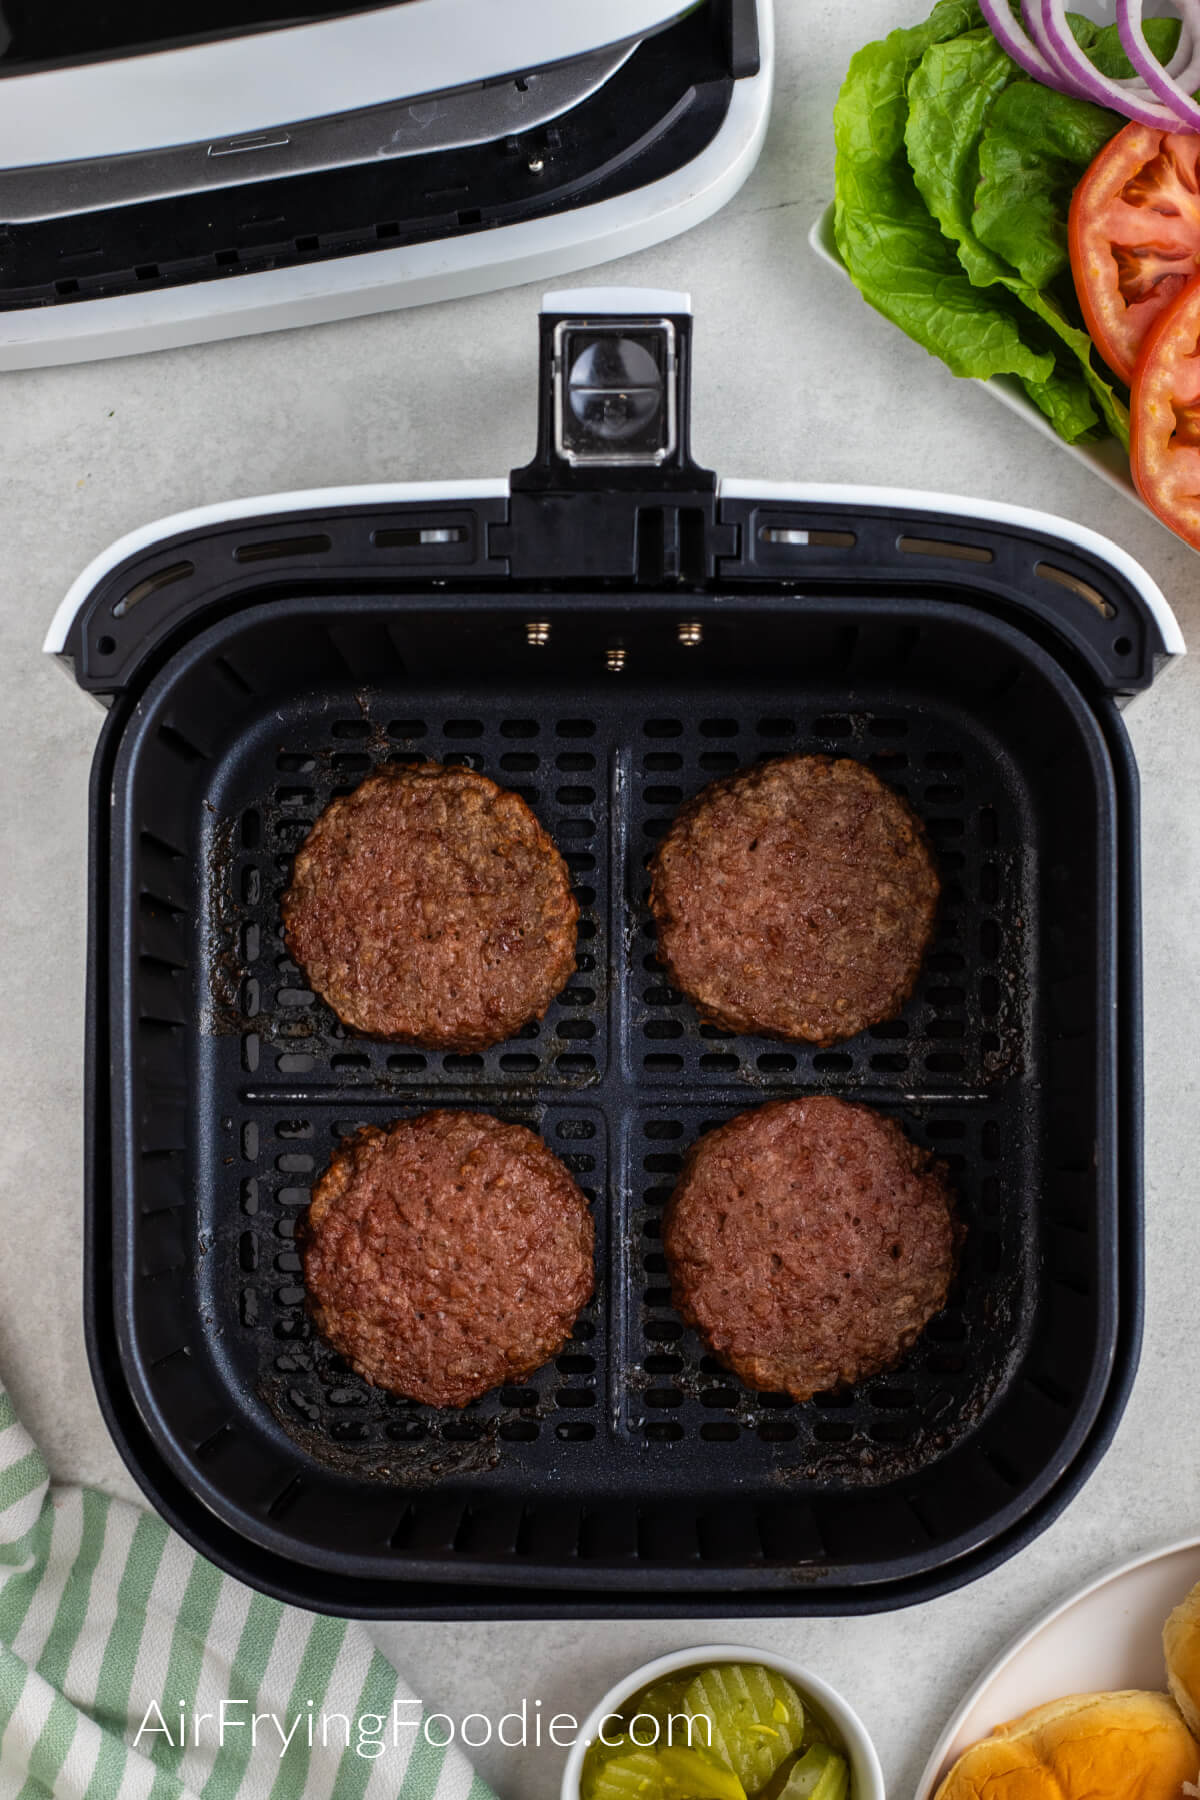 Air fried Beyond burgers in the basket of the air fryer. 